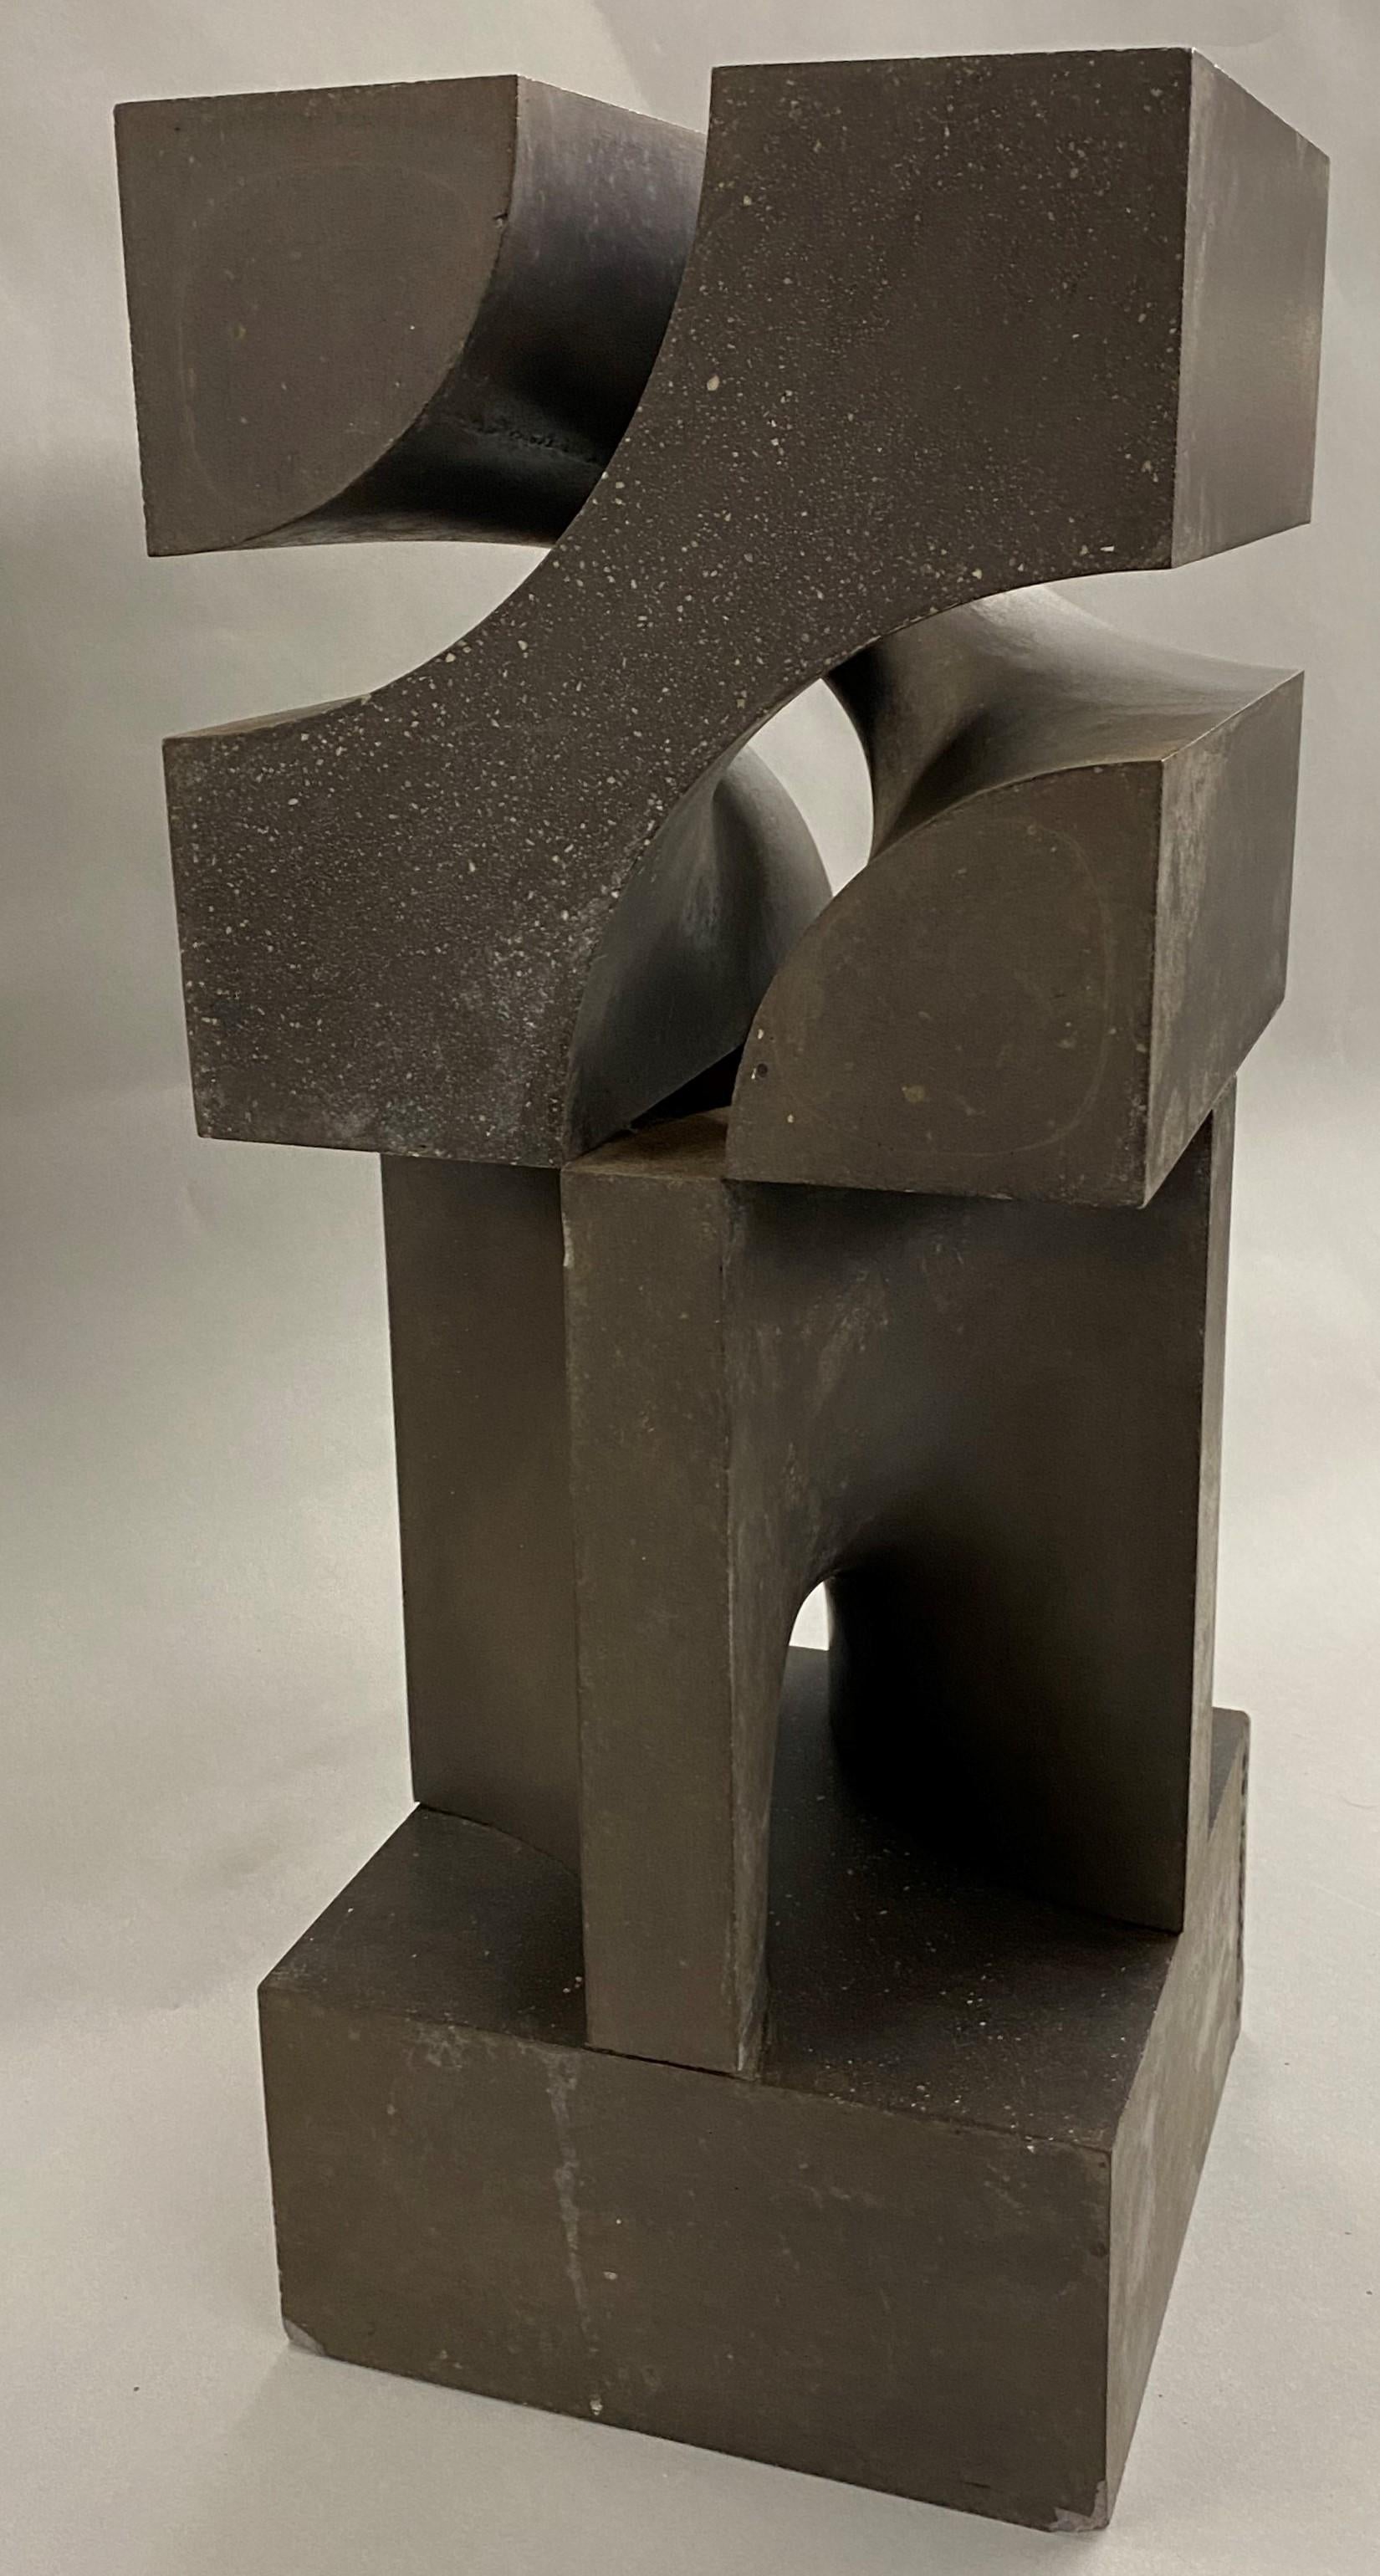 Slate Sculpture in Geometric Form - Black Abstract Sculpture by Norman Kenneth Carlberg